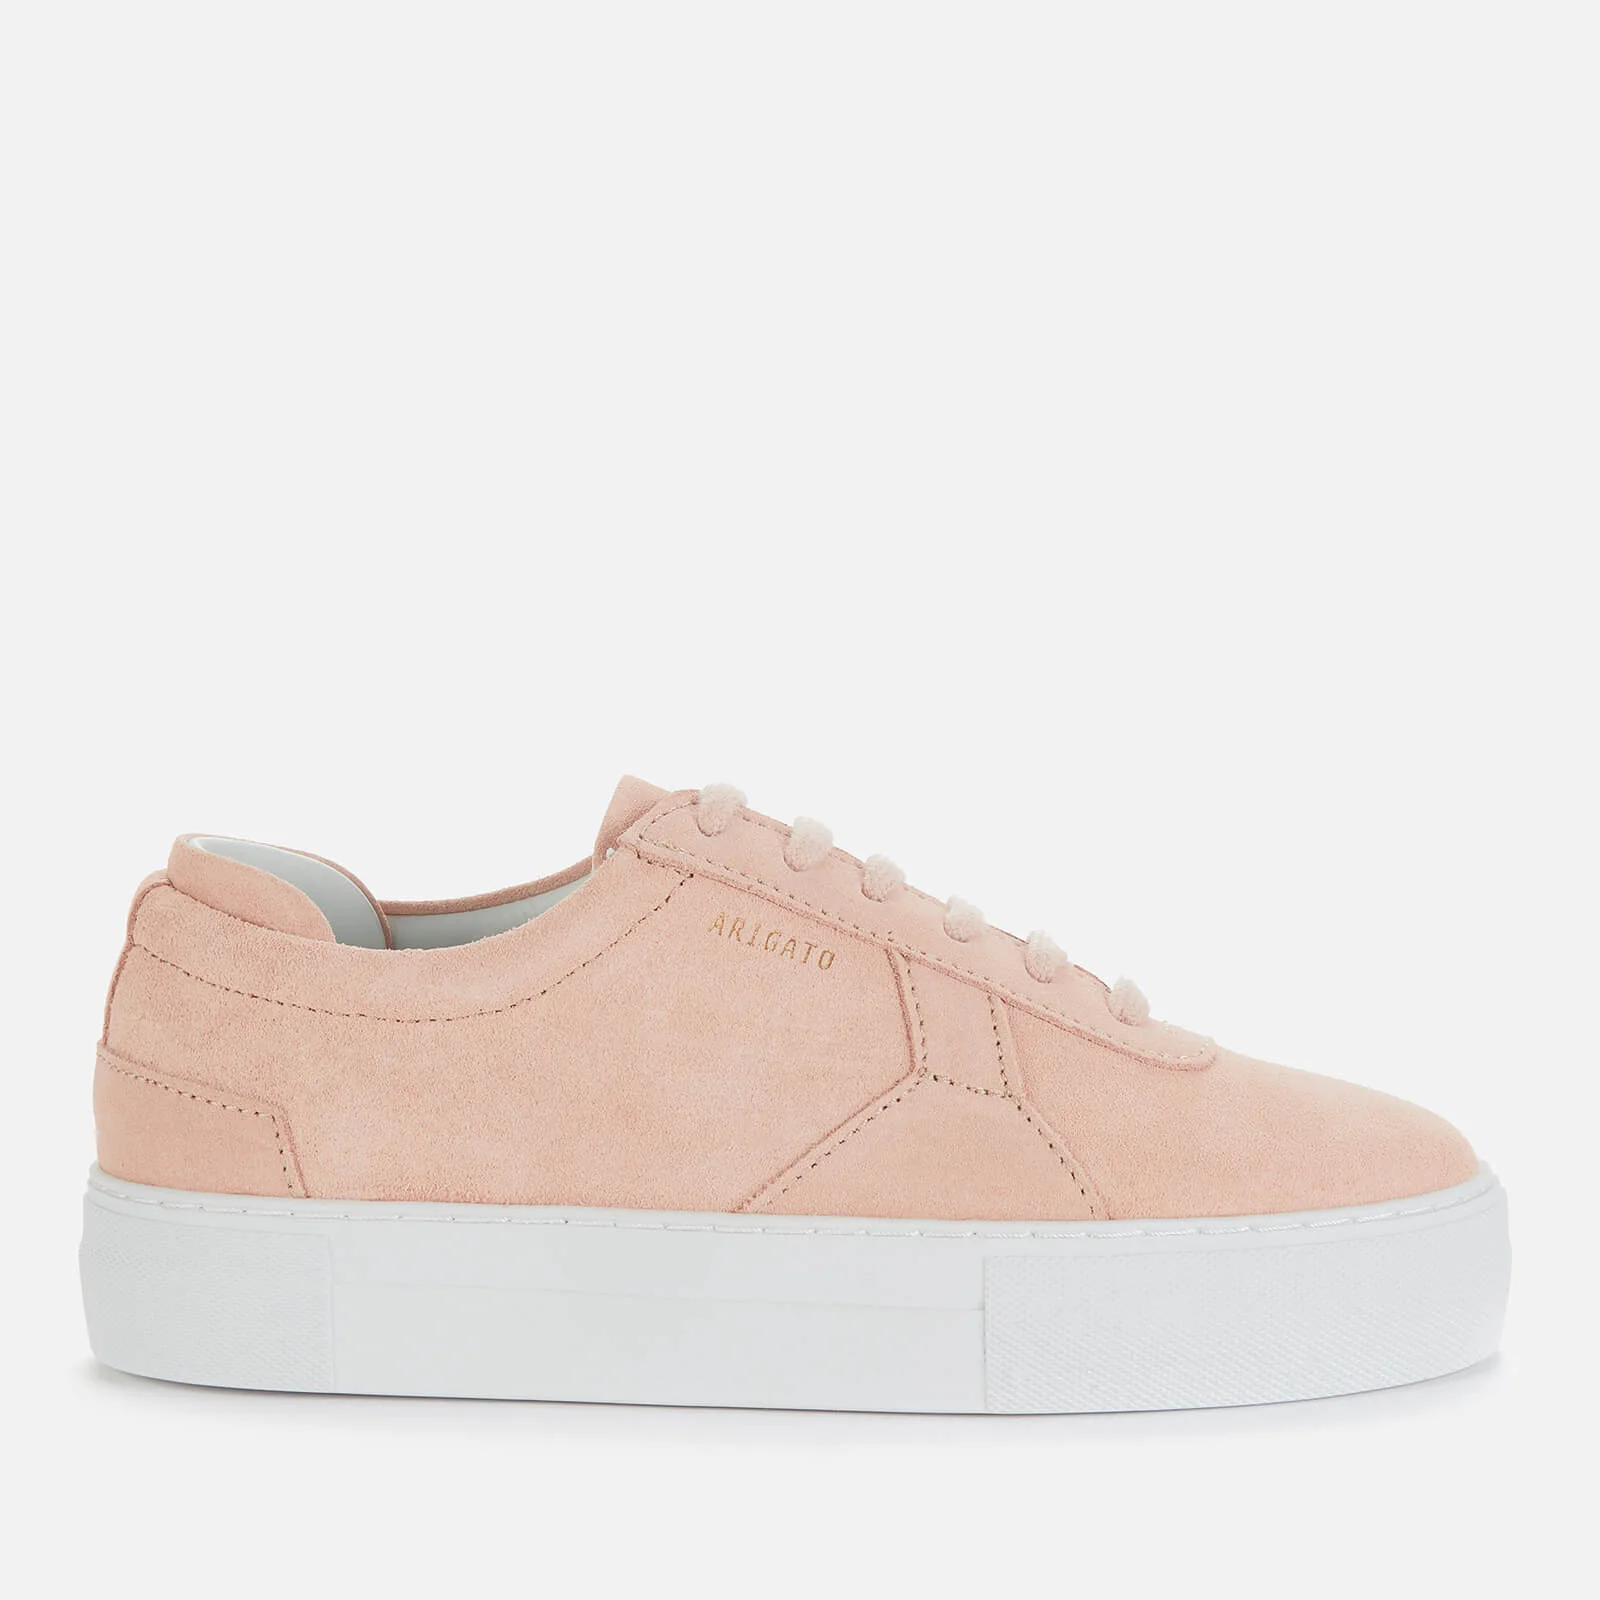 Axel Arigato Women's Platform Suede Trainers - Pale Pink Image 1